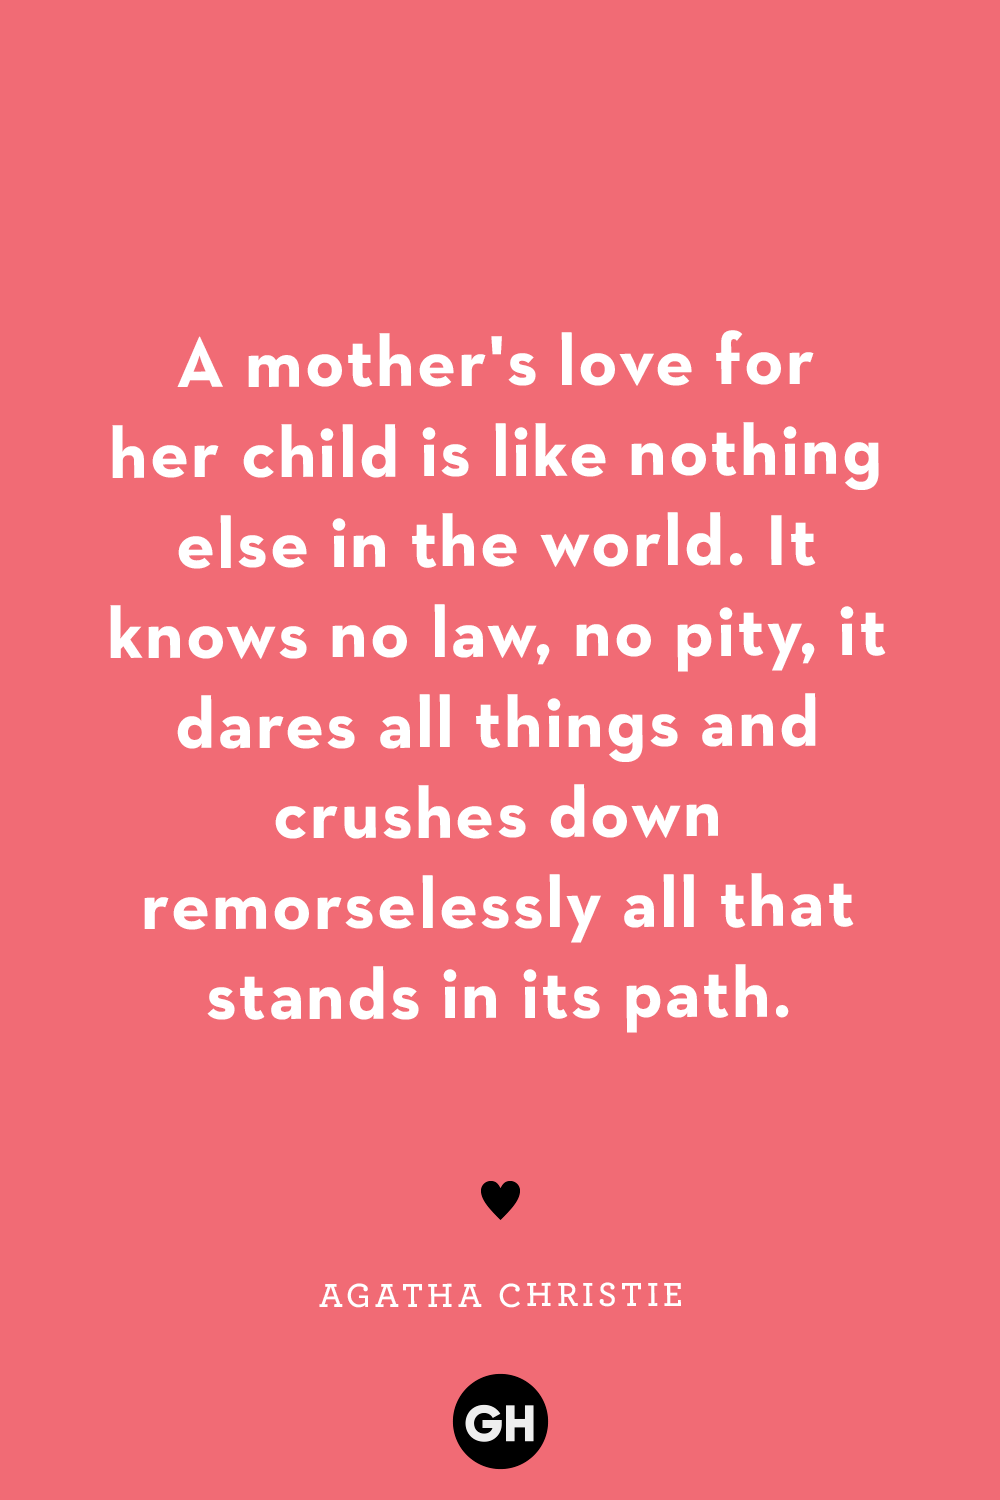 40 Best New Mom Quotes Wise Sayings For First Time Parents